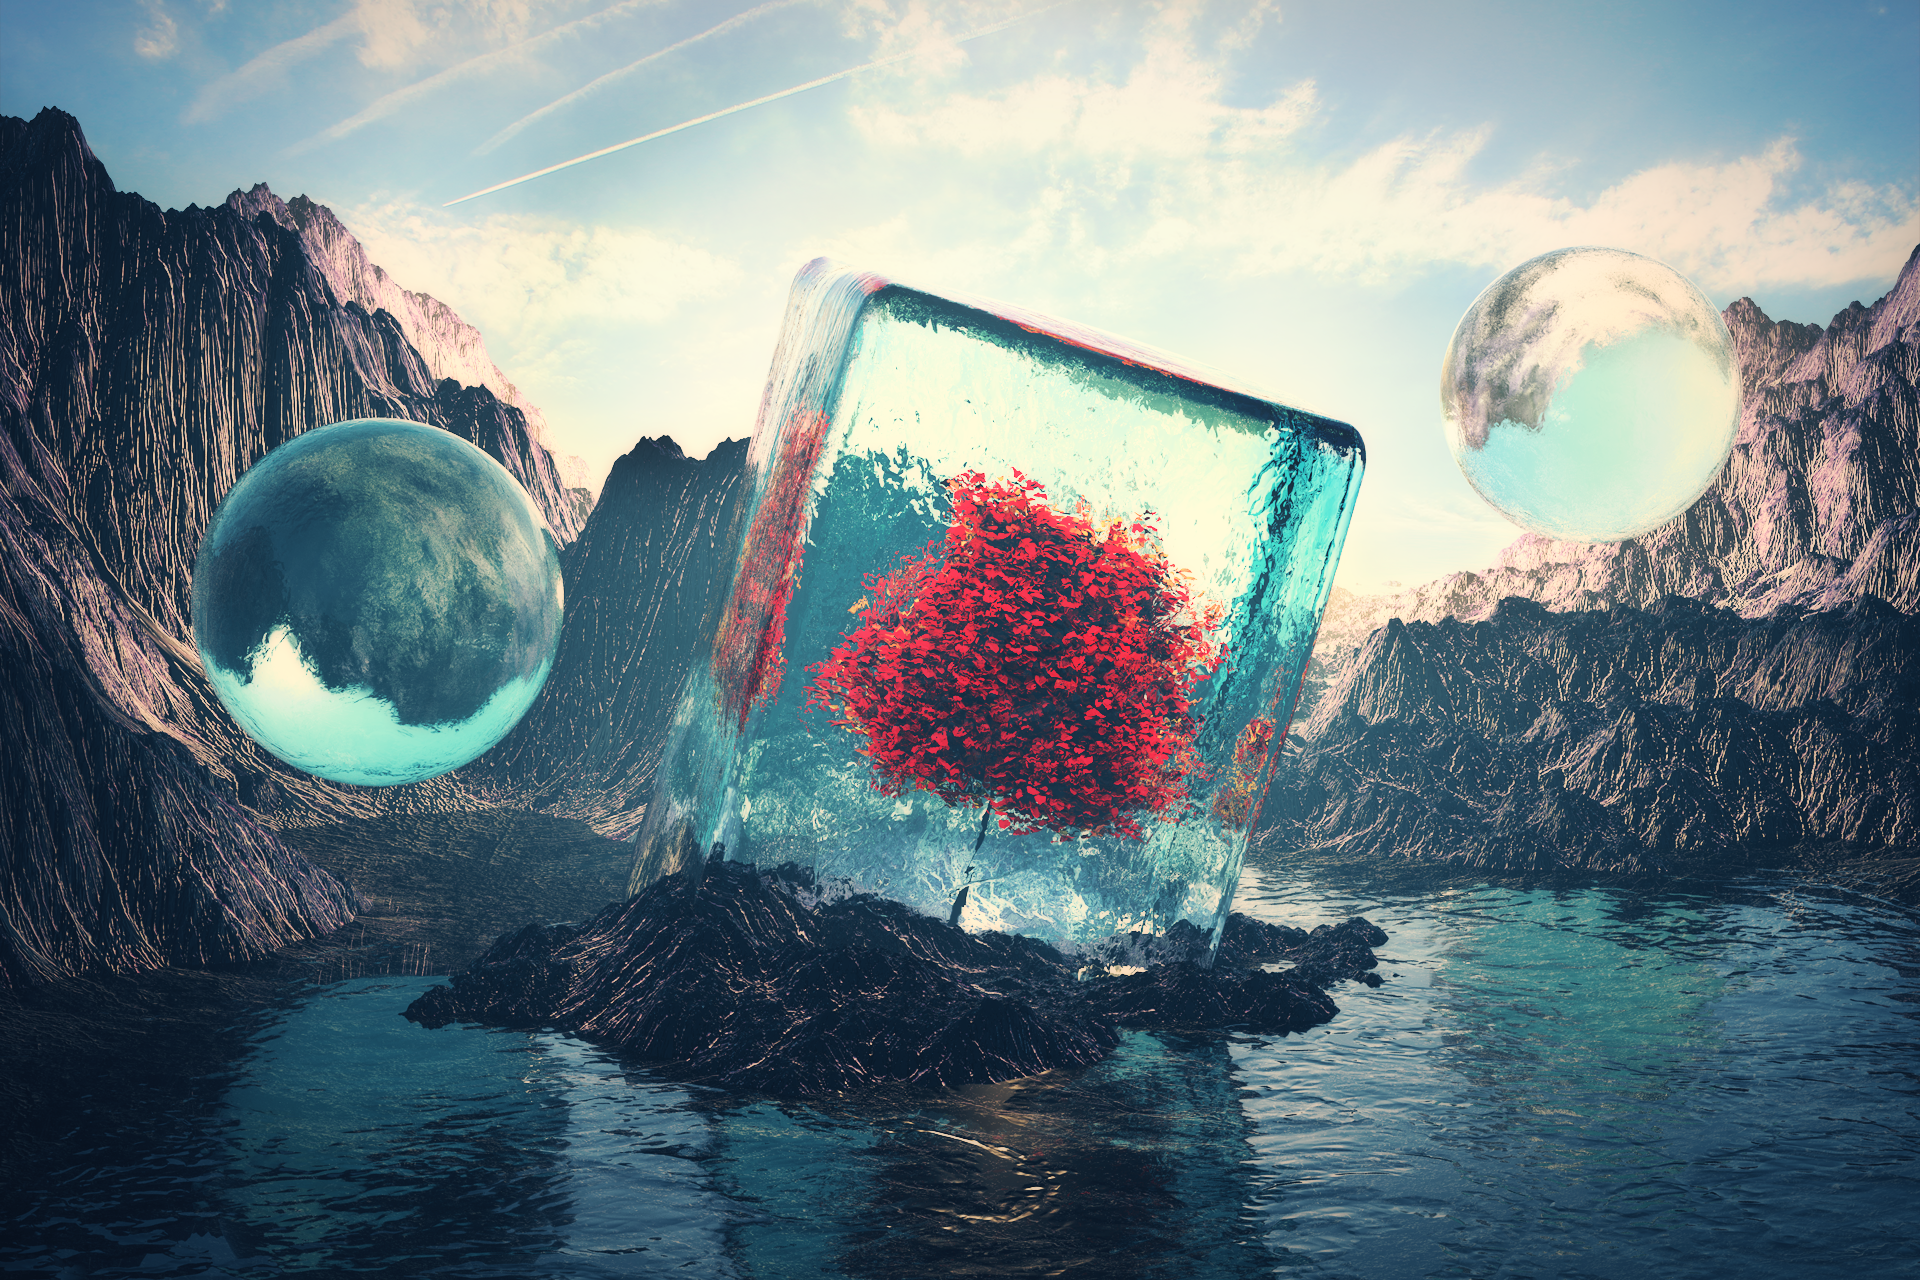 Cinema4D Landscape Nature Abstract Digital Art 3D Abstract Surreal 1920x1280